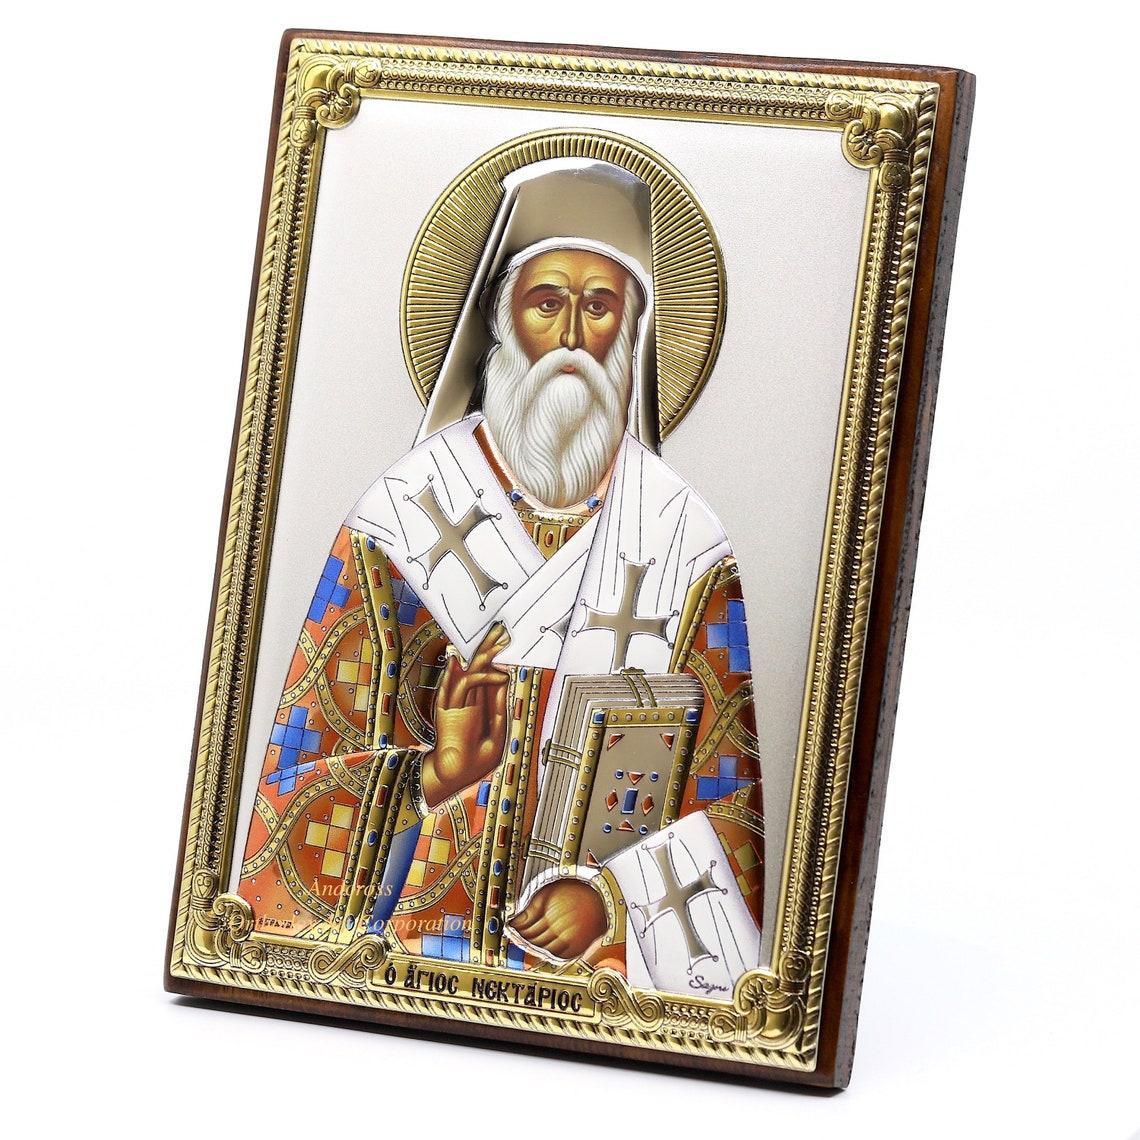 The Icon Of St Nectarios. Buy The Consecrated Replica Of The Sacred Image Online